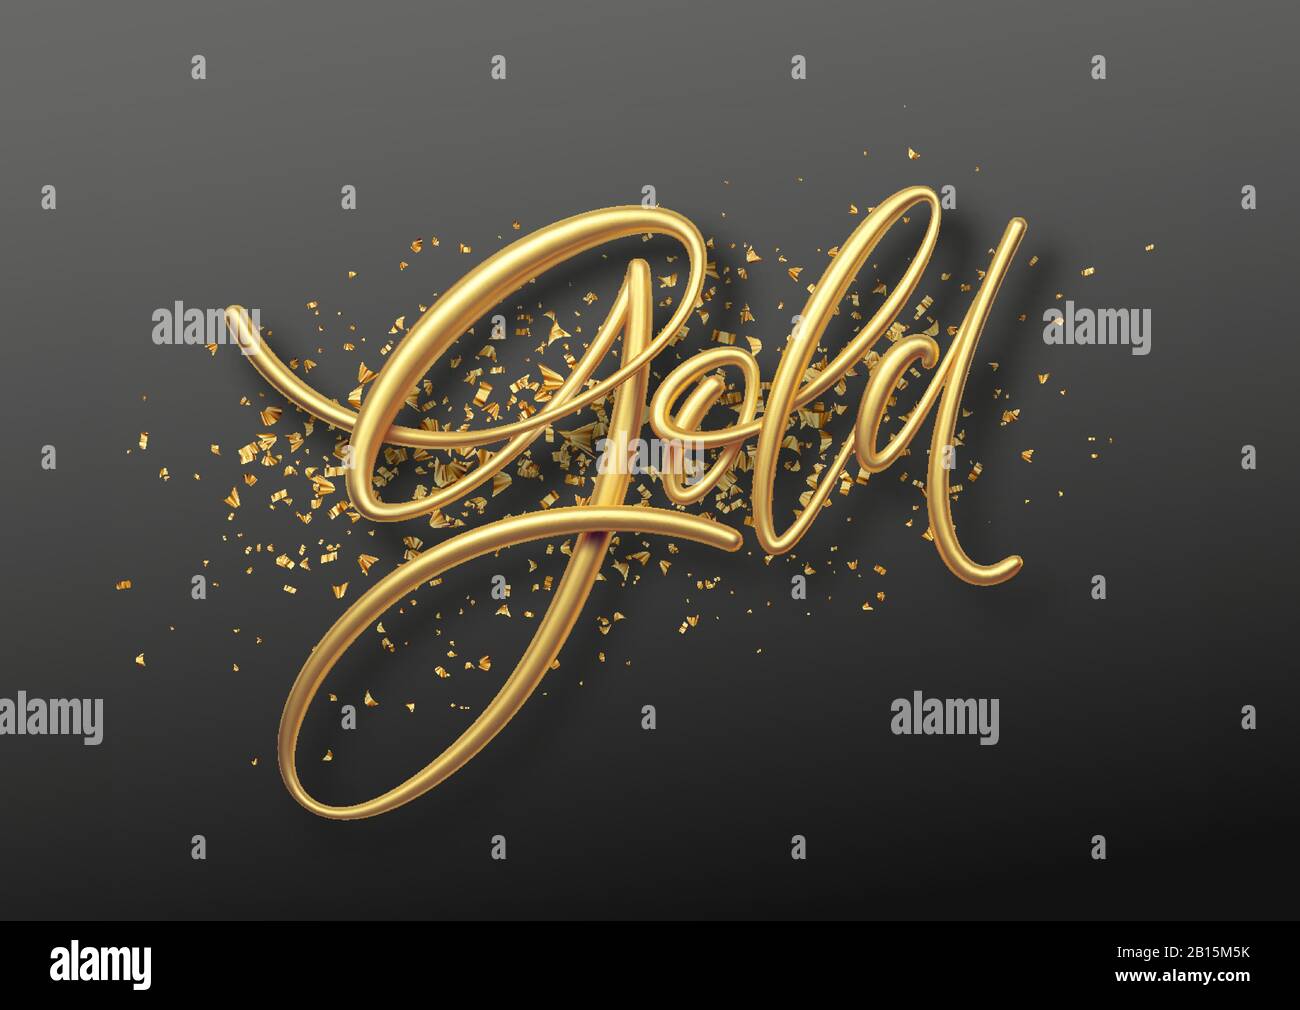 Word Gold 3d calligraphic lettering realistic illustration isolated on black background. Vector illustration Stock Vector